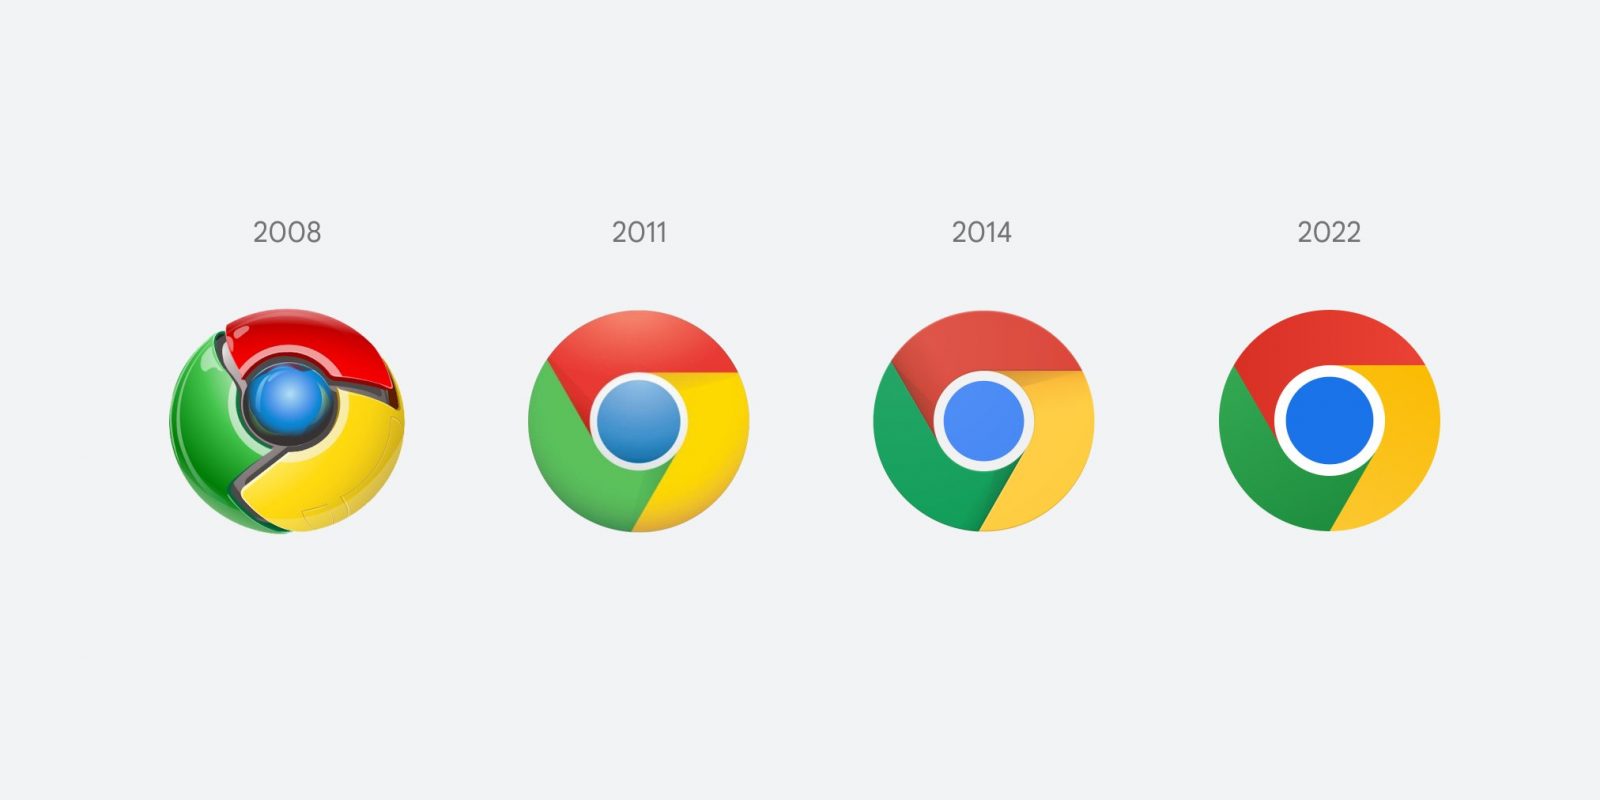 Google Chrome logos side by side, including 2008, 2011, 2014, and 2022.